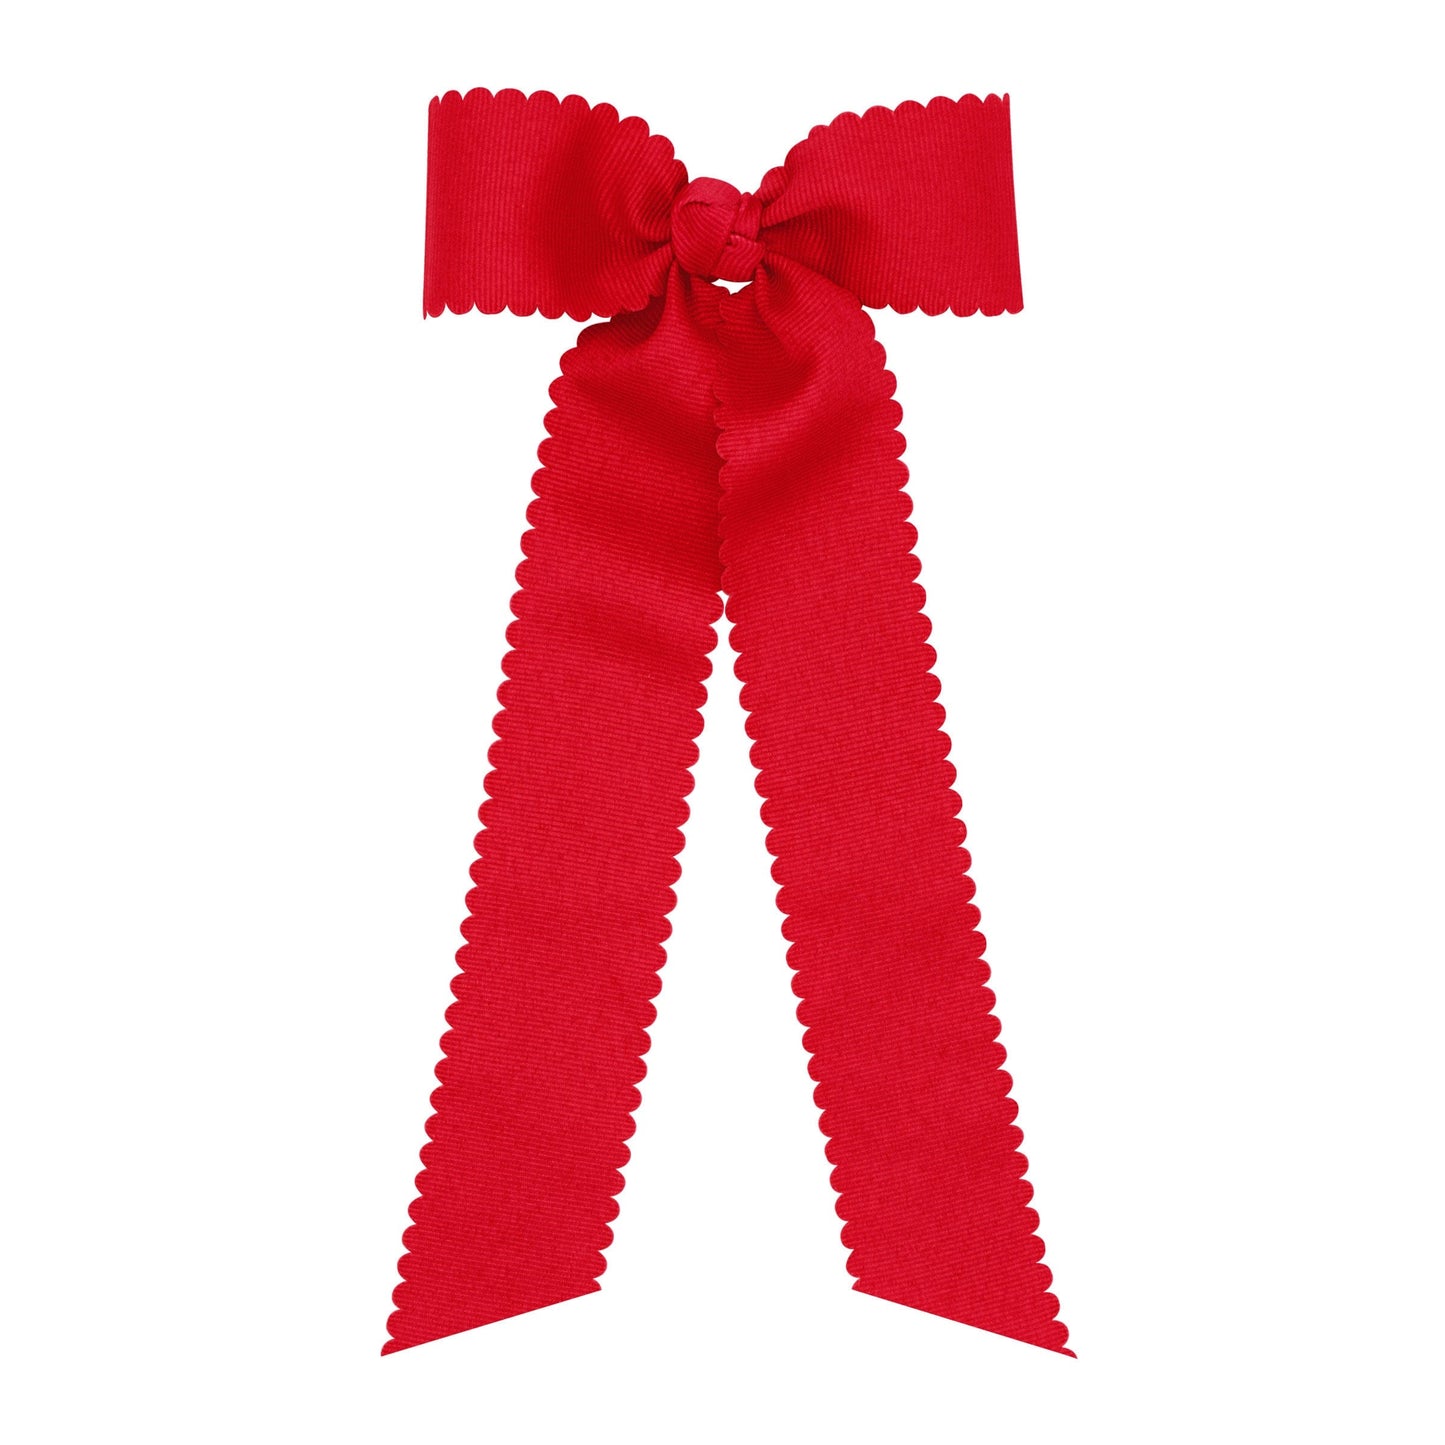 Medium Grosgrain Scallop Bow with Streamer Tails (more colors)